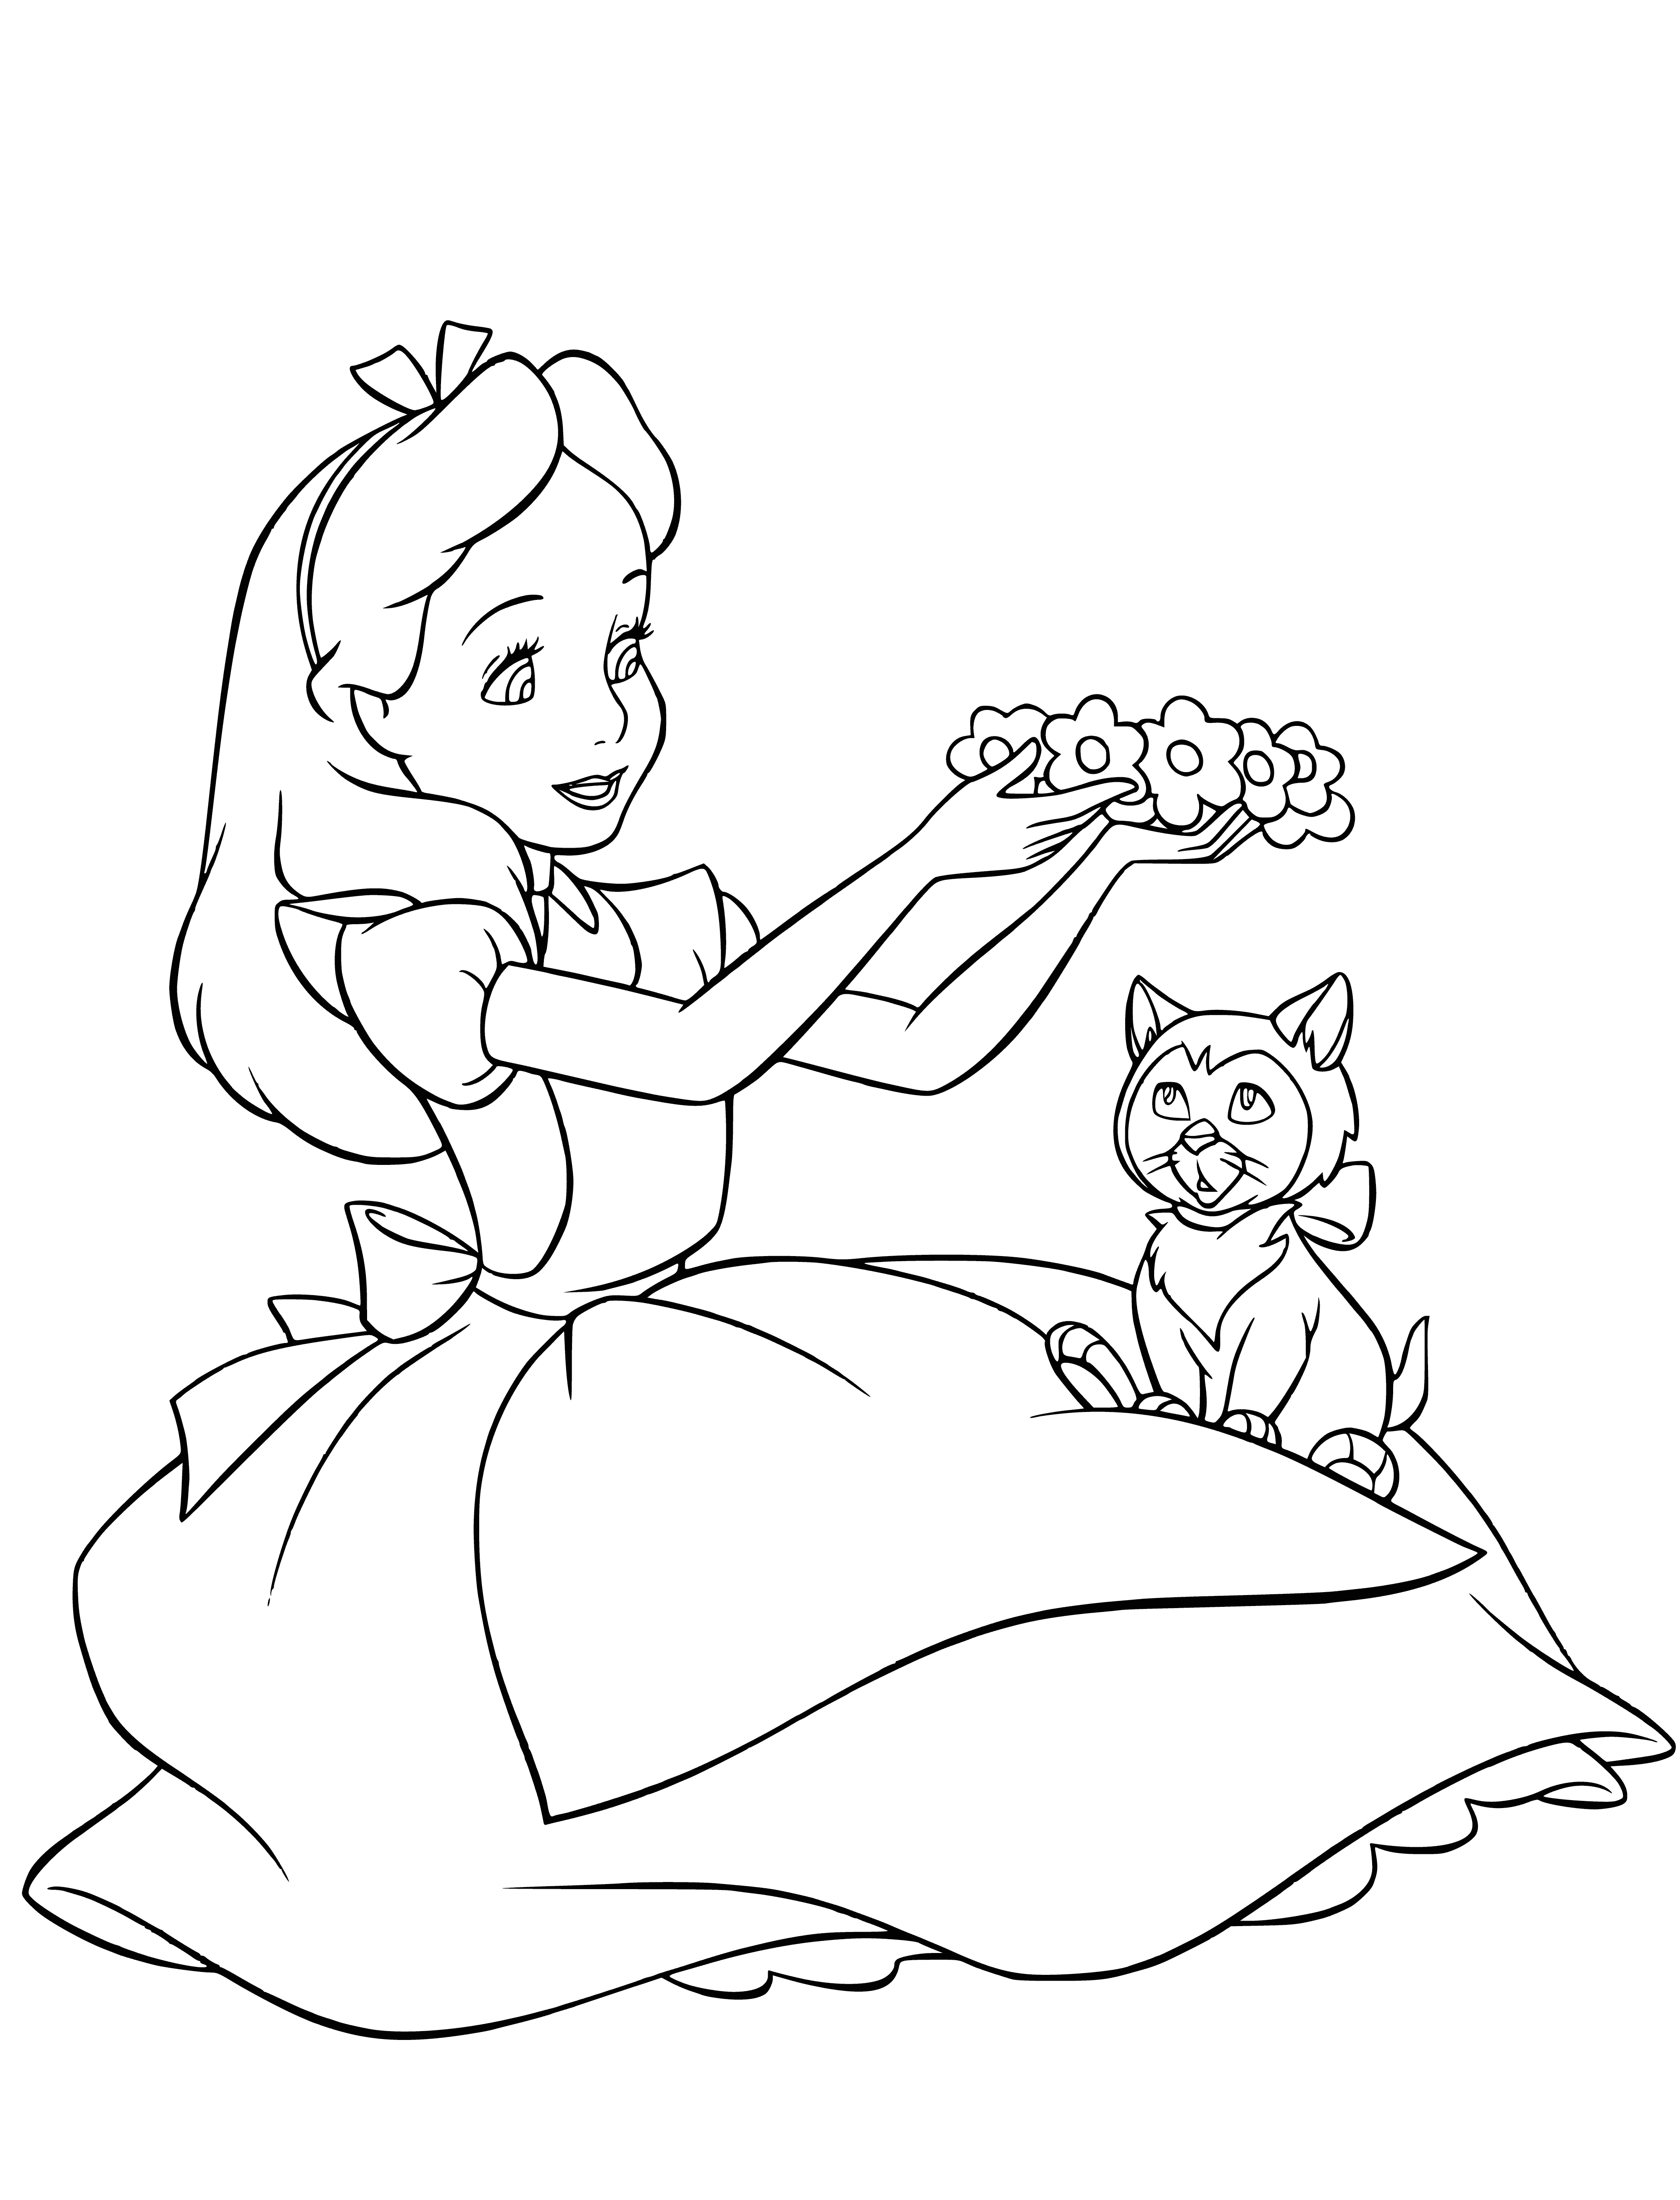 Alice plays with a kitten coloring page